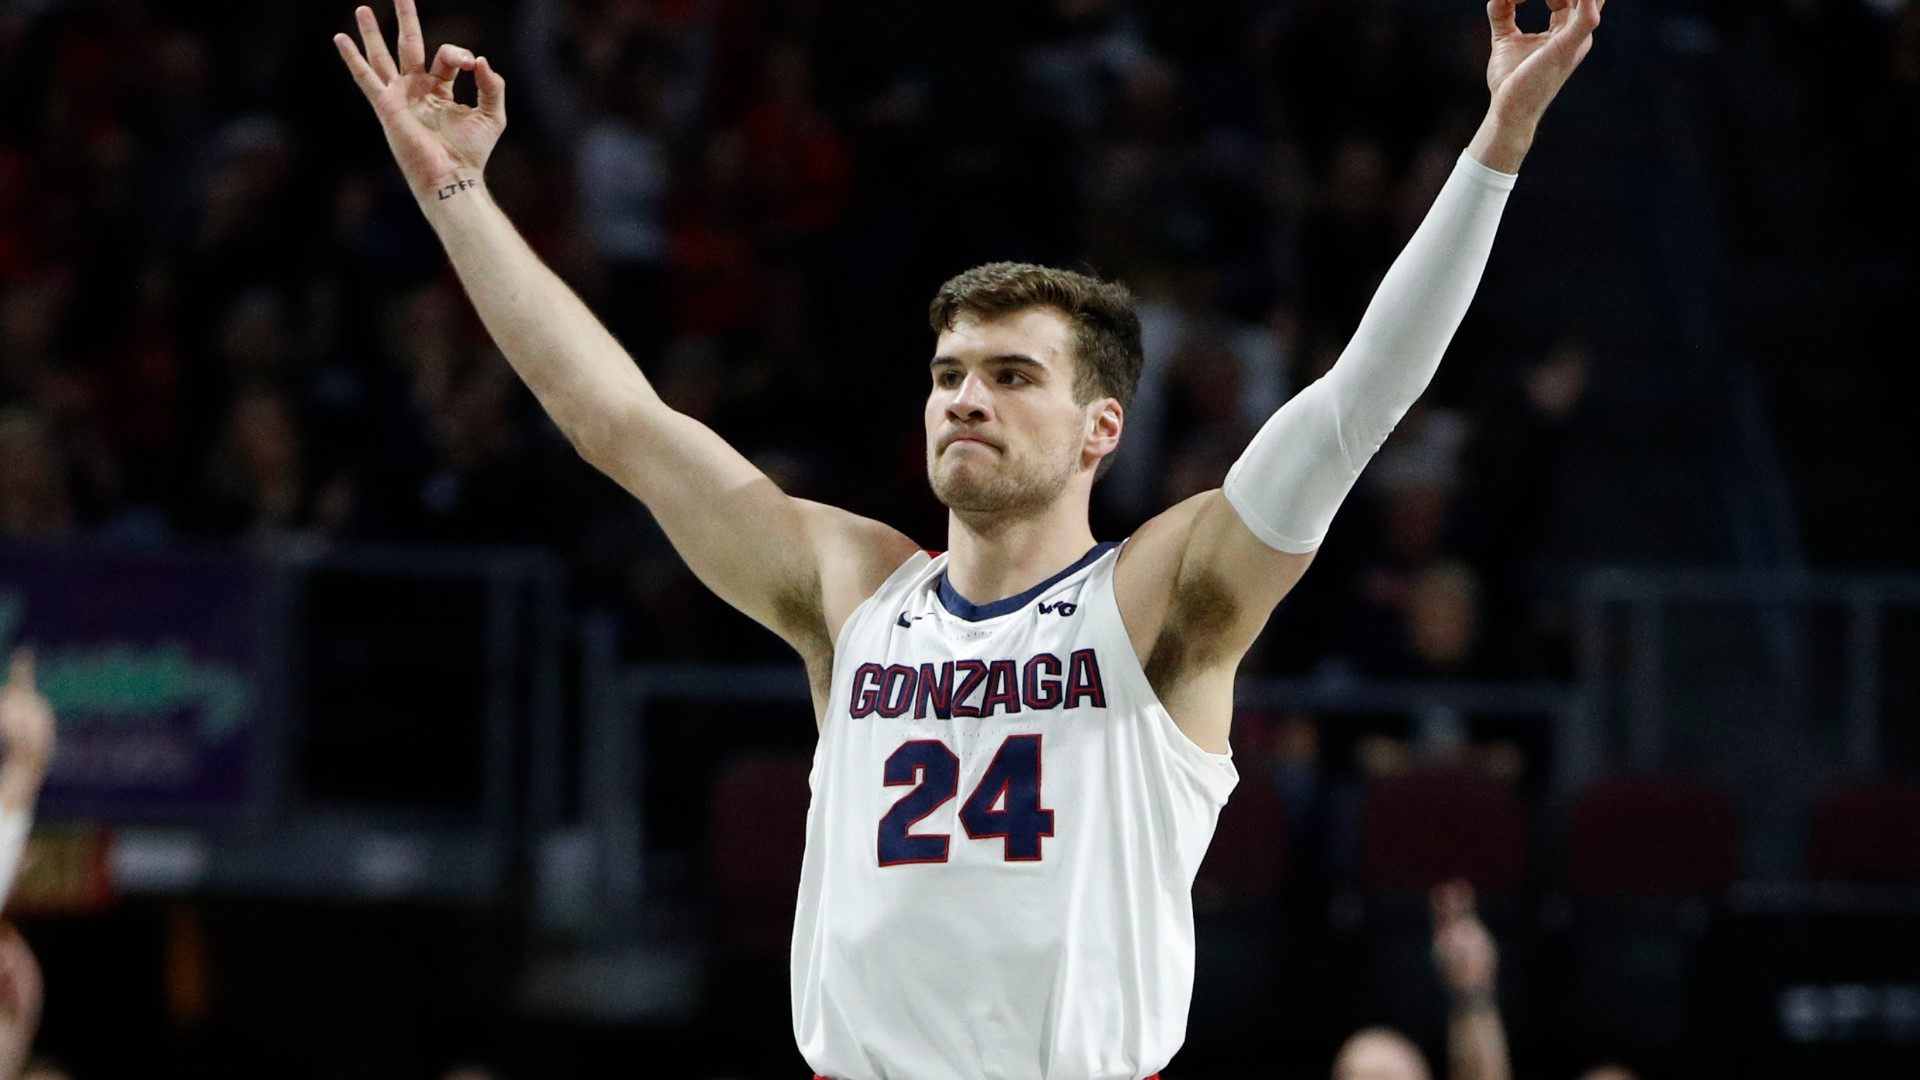 Every poll in the country has the Zags ranked either #1 or #2 coming into their 2020-2021 campaign.